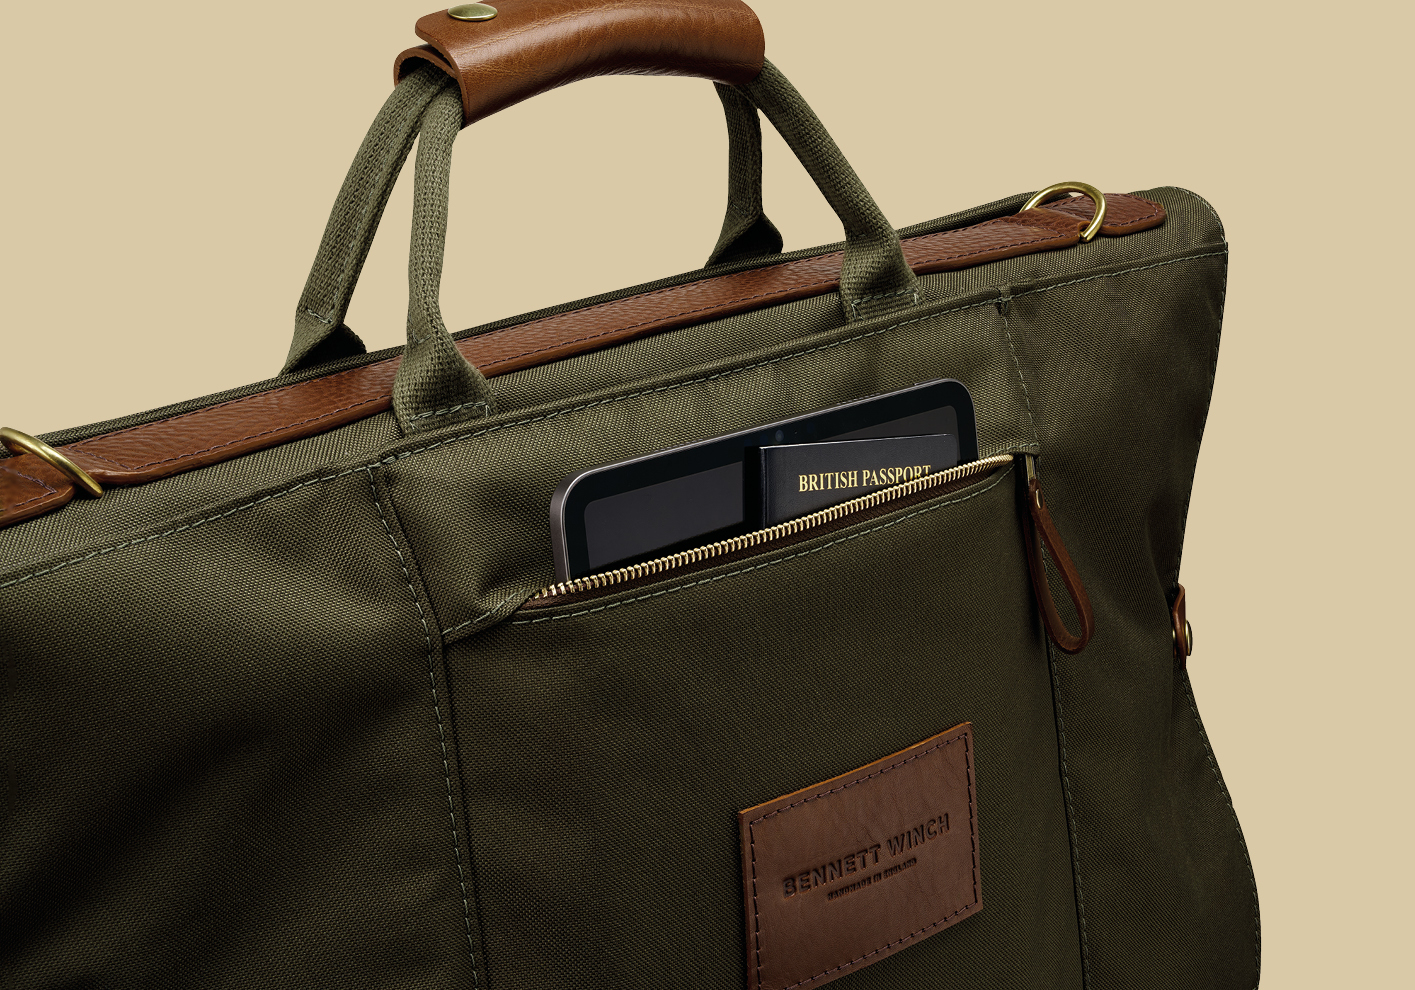 Bennett Winch’s Trifold suit carrier in olive, £750